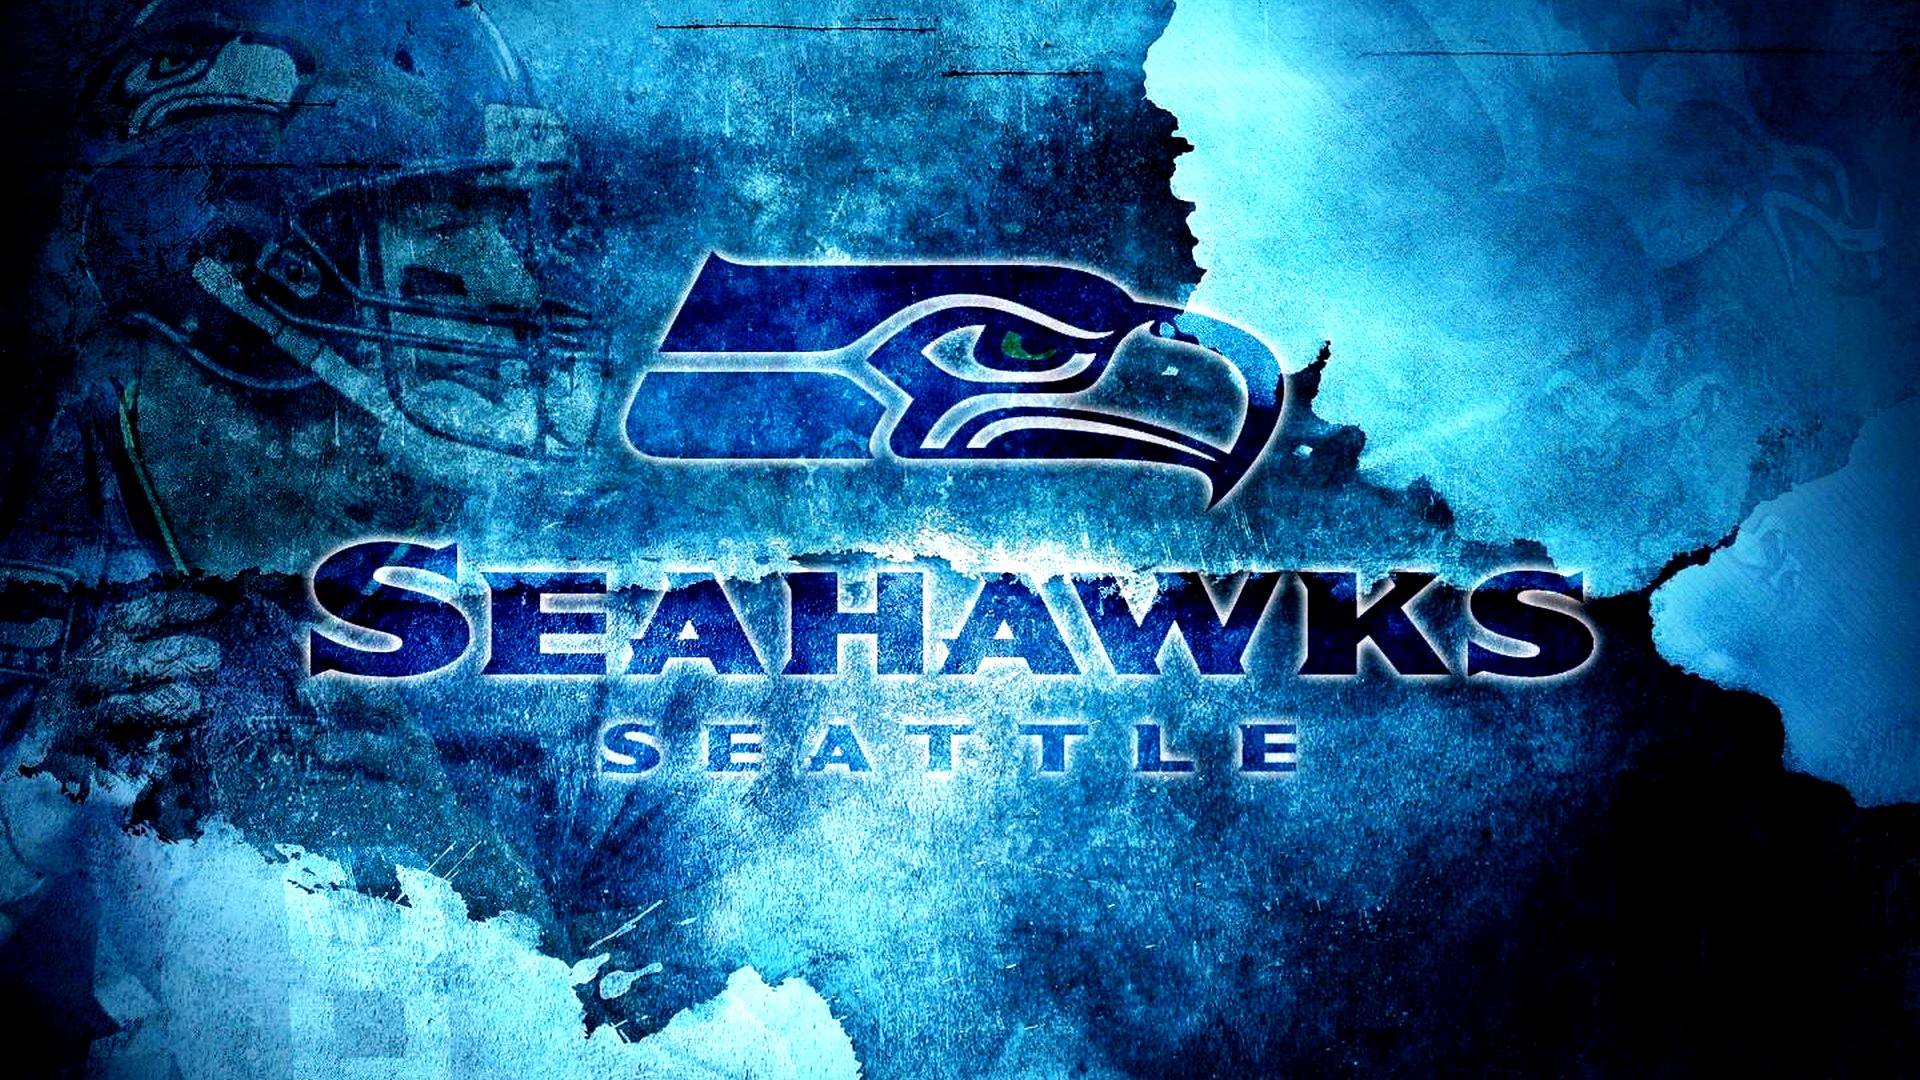 Seattle Seahawks Logo For Desktop Wallpaper With high-resolution 1920X1080 pixel. You can use this wallpaper for your Mac or Windows Desktop Background, iPhone, Android or Tablet and another Smartphone device